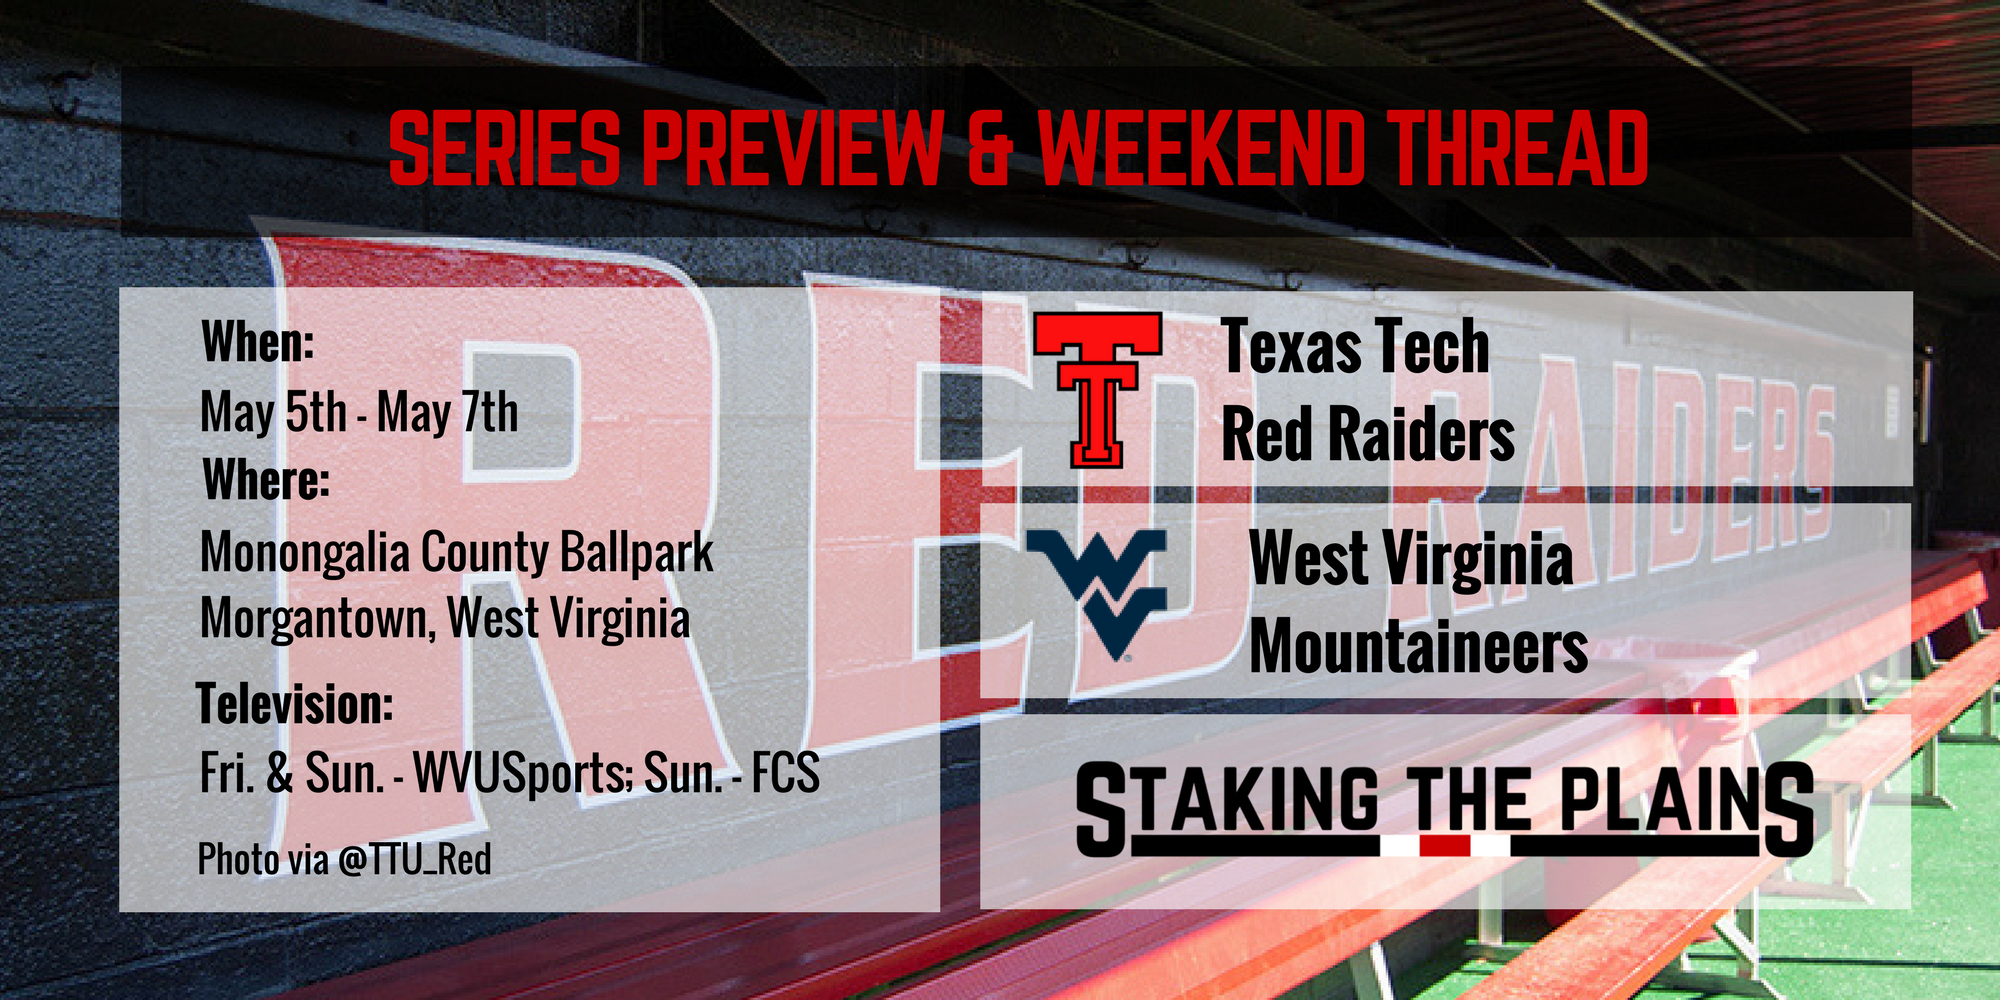 Series Preview and Weekend Thread: Texas Tech vs. West Virginia